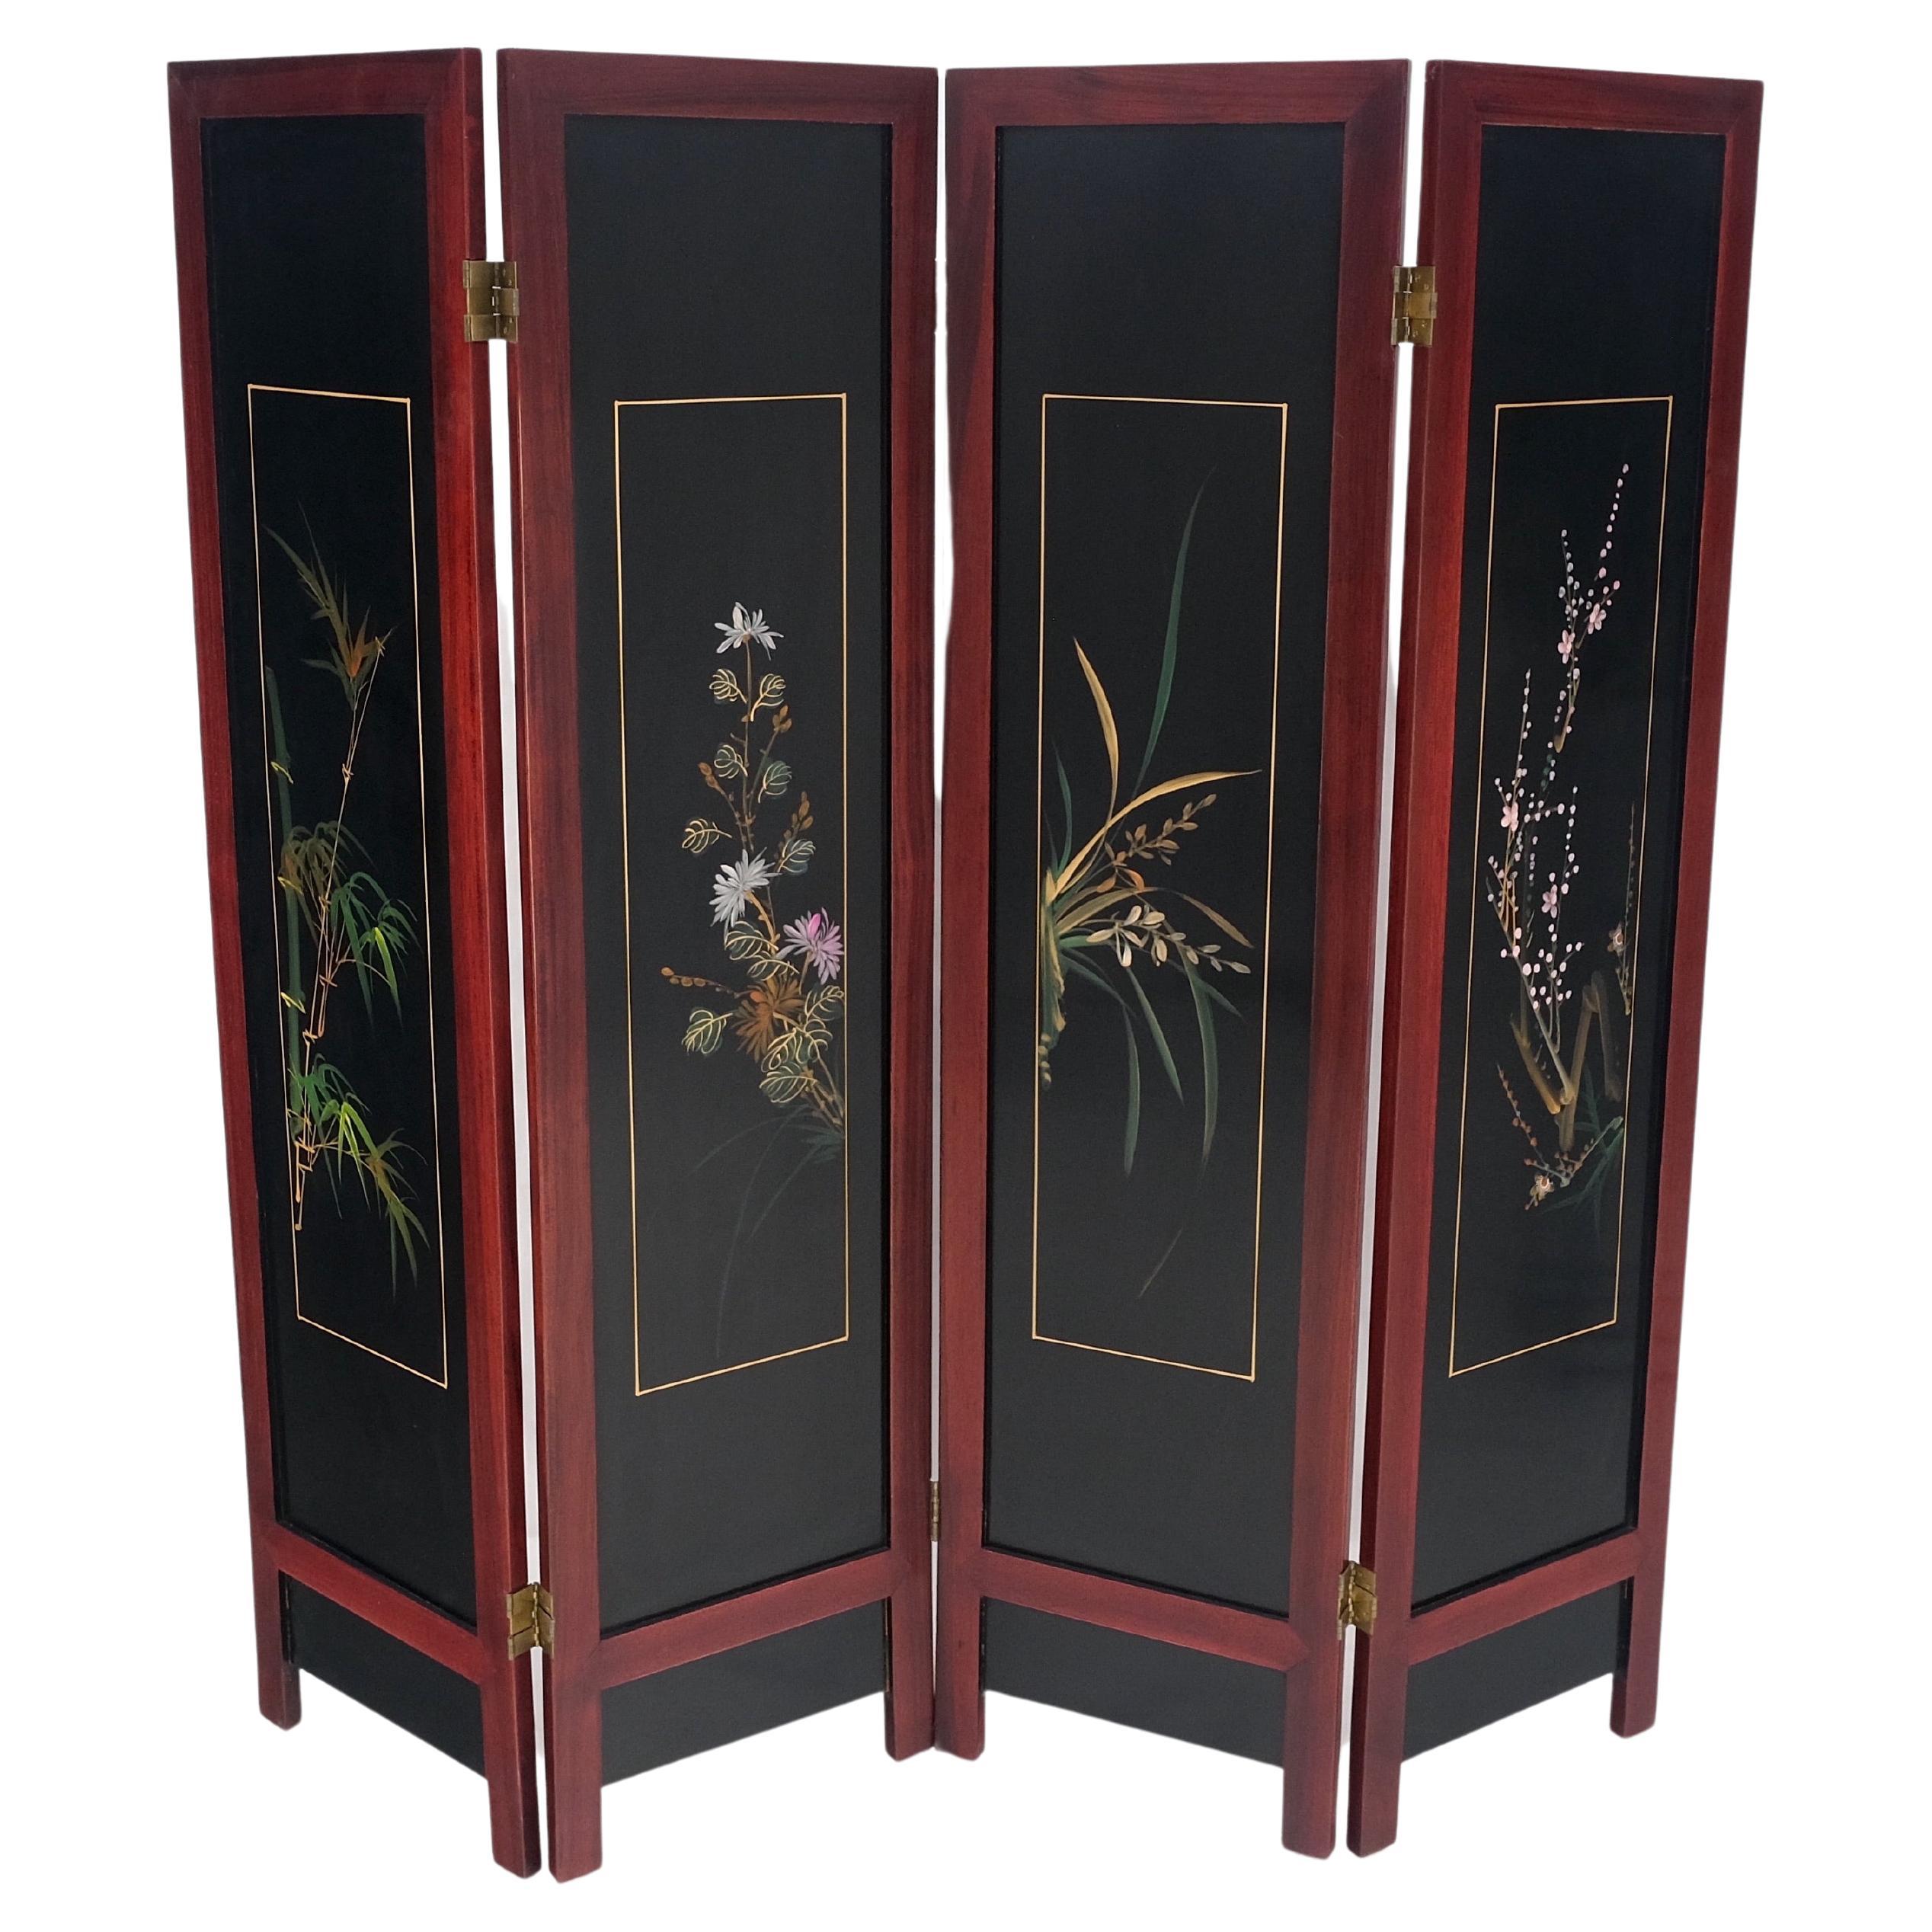 Lacquered Wood Mother of Pearl Chinese Oriental 4 Panel Room Divider Screen